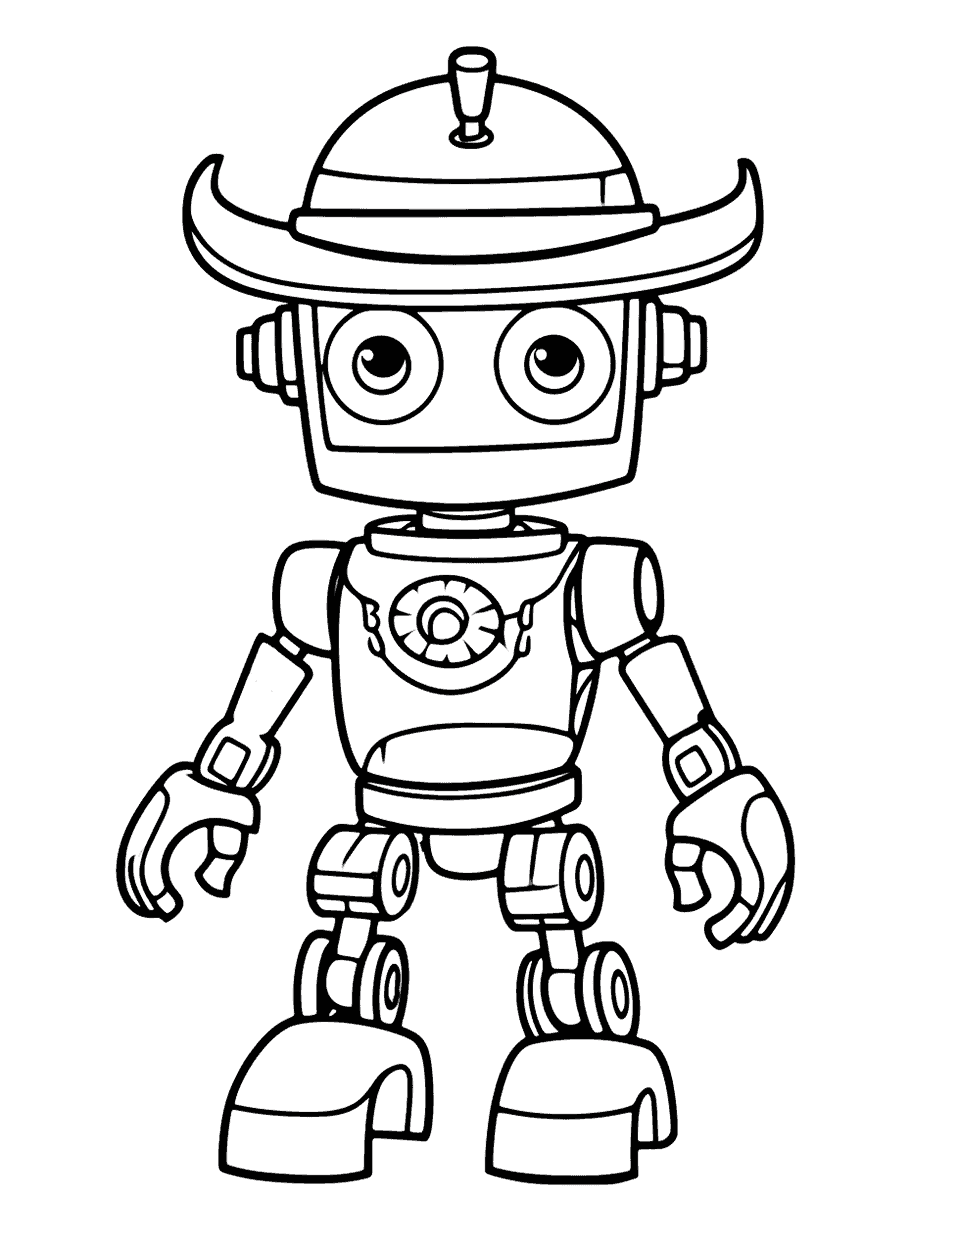 Cowboy Robot on a Horse Coloring Page - A robot dressed as a cowboy.